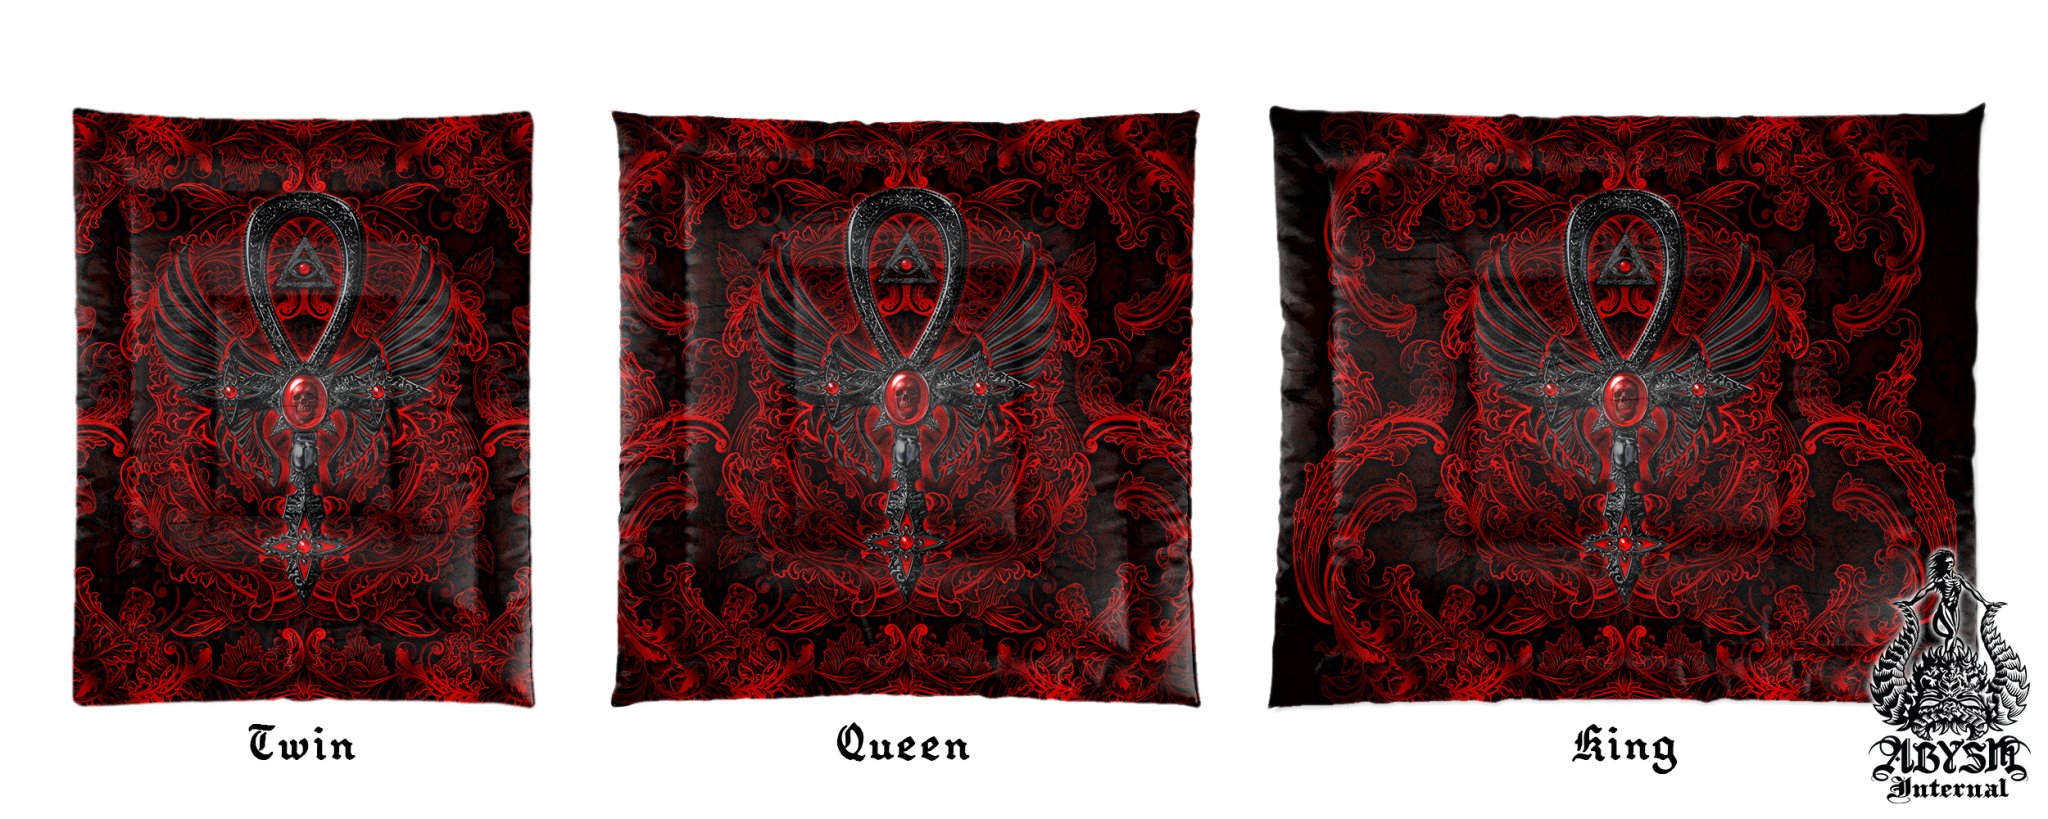 Bloody Gothic Comforter or Duvet, Red Ankh Bed Cover, Goth Bedroom Decor, King, Queen & Twin Bedding Set - Dark, Gold, Black, 3 Colors - Abysm Internal